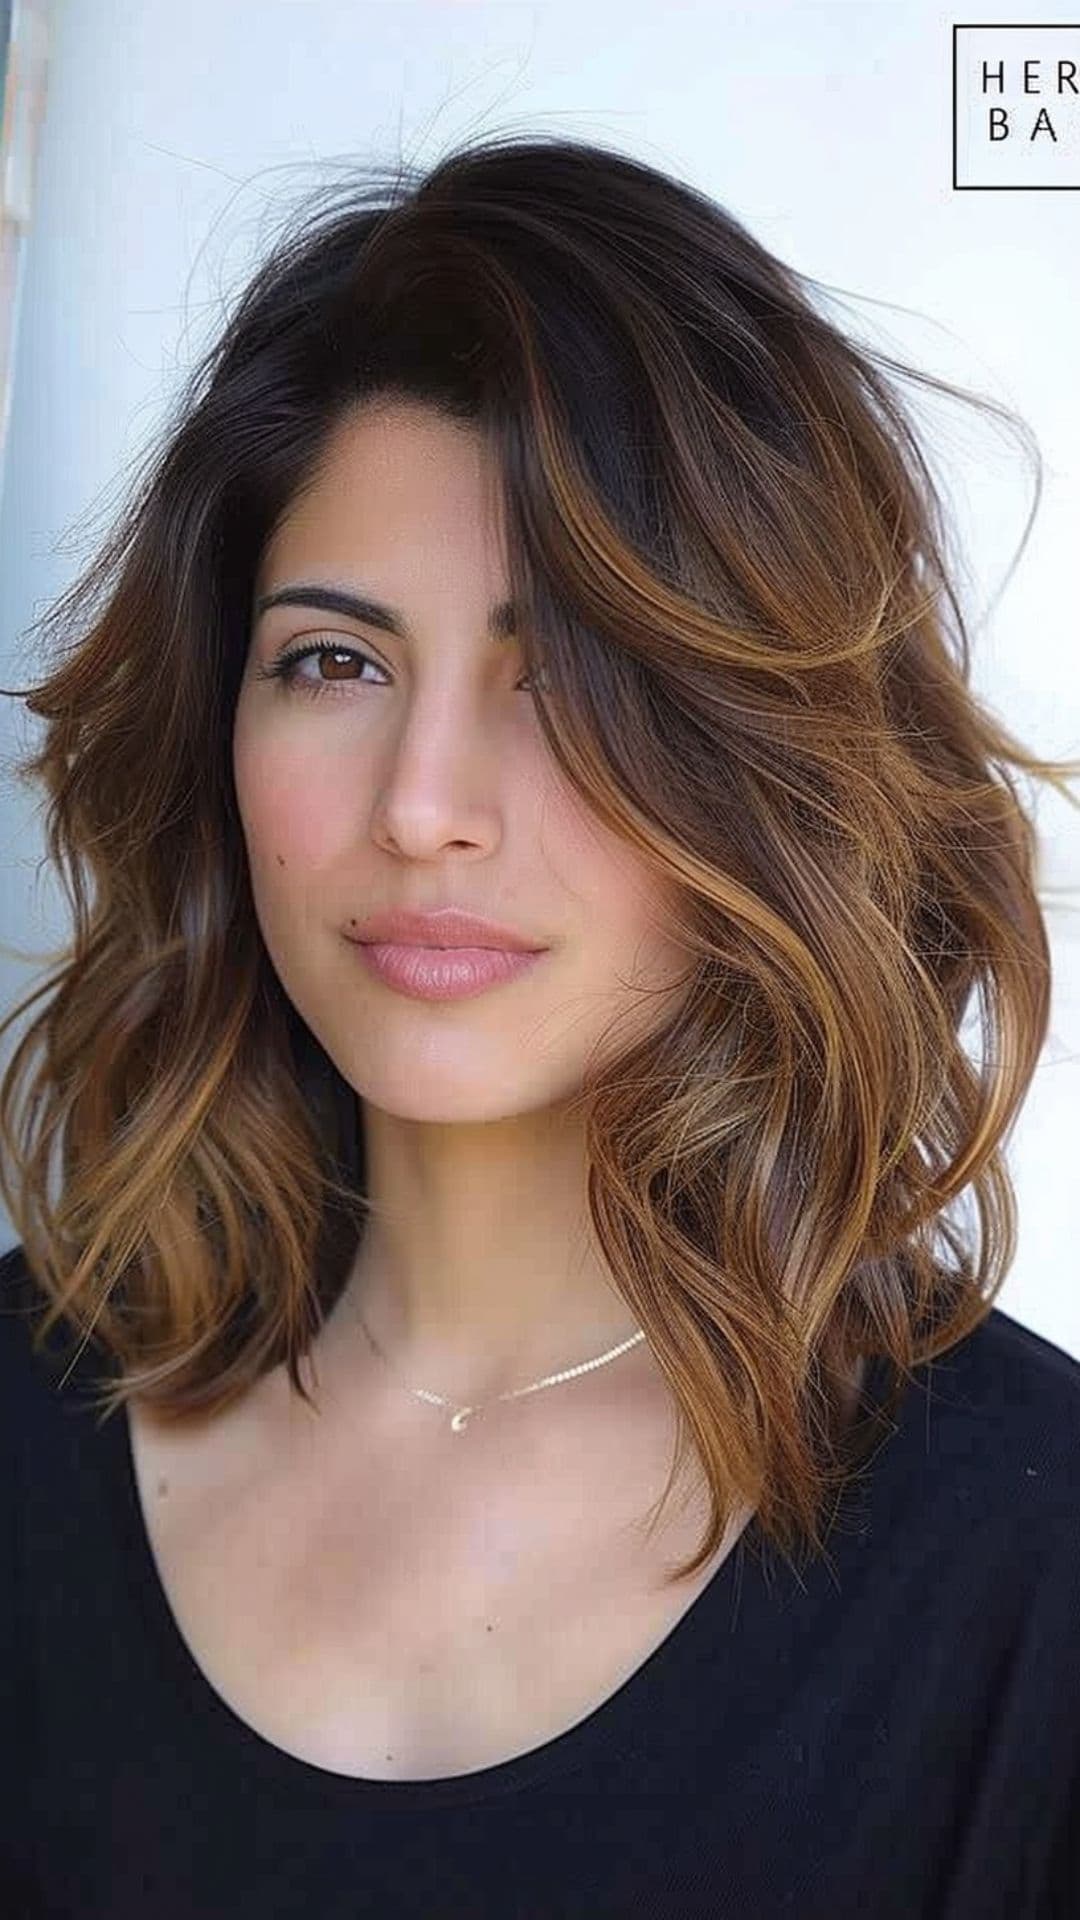 A woman modelling a layered medium-length hair with side part.